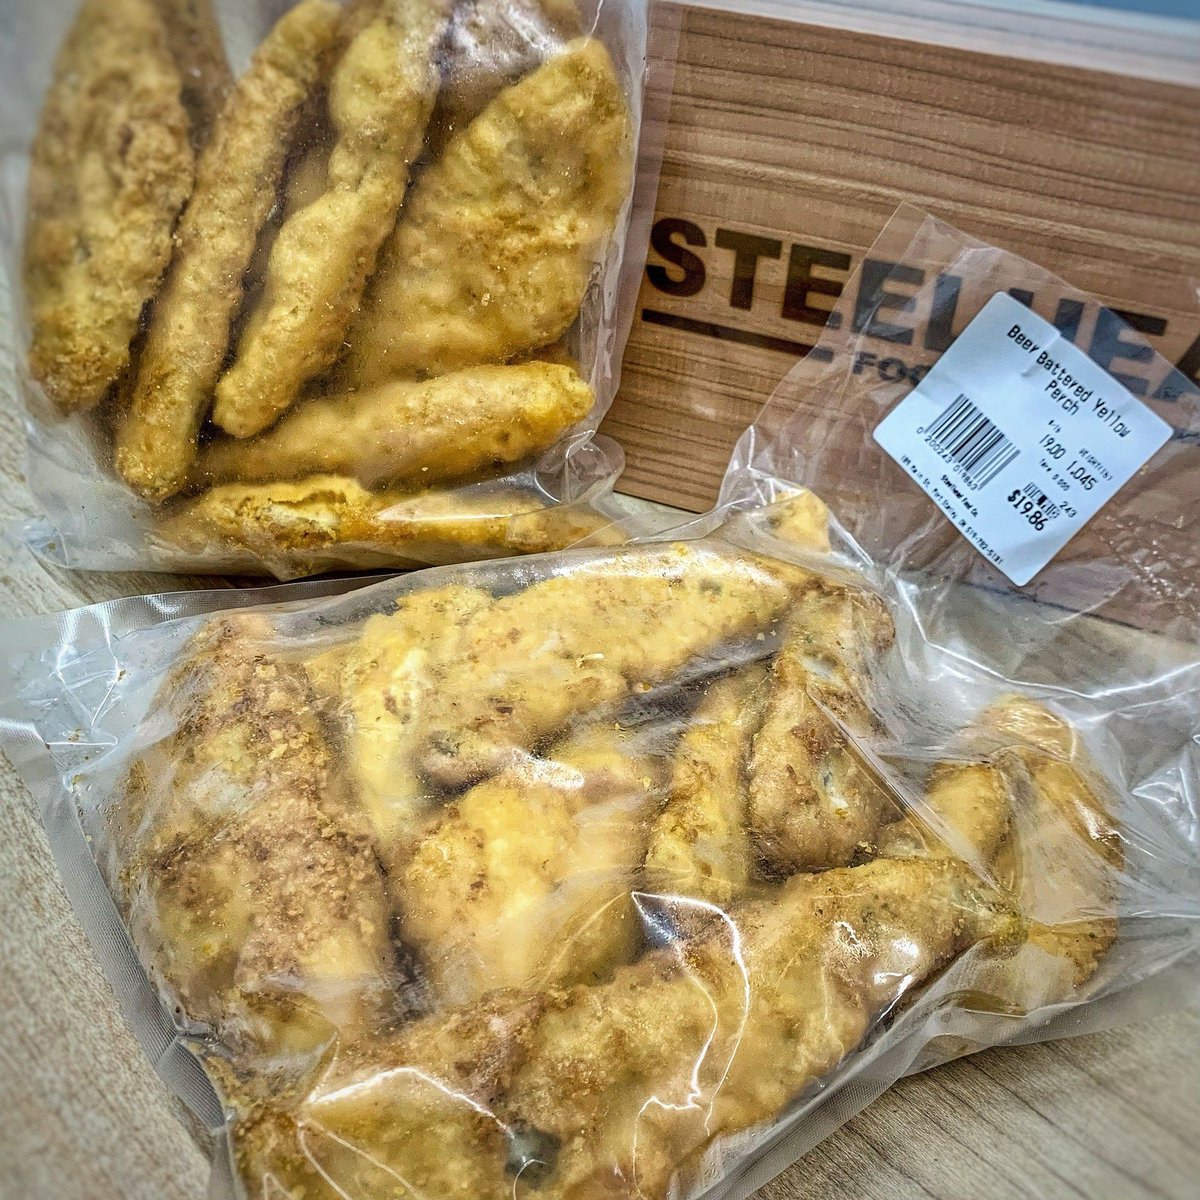 🐟 Today's #FriendlyFriday shout out goes to @steelheadfoodco! Steelhead offers some amazing products at their local market, found at 5 Barrie Blvd. 🌮 Pictured here is their Lake Erie Beer Battered Yellow Perch, Taco cut! l8r.it/jJI6